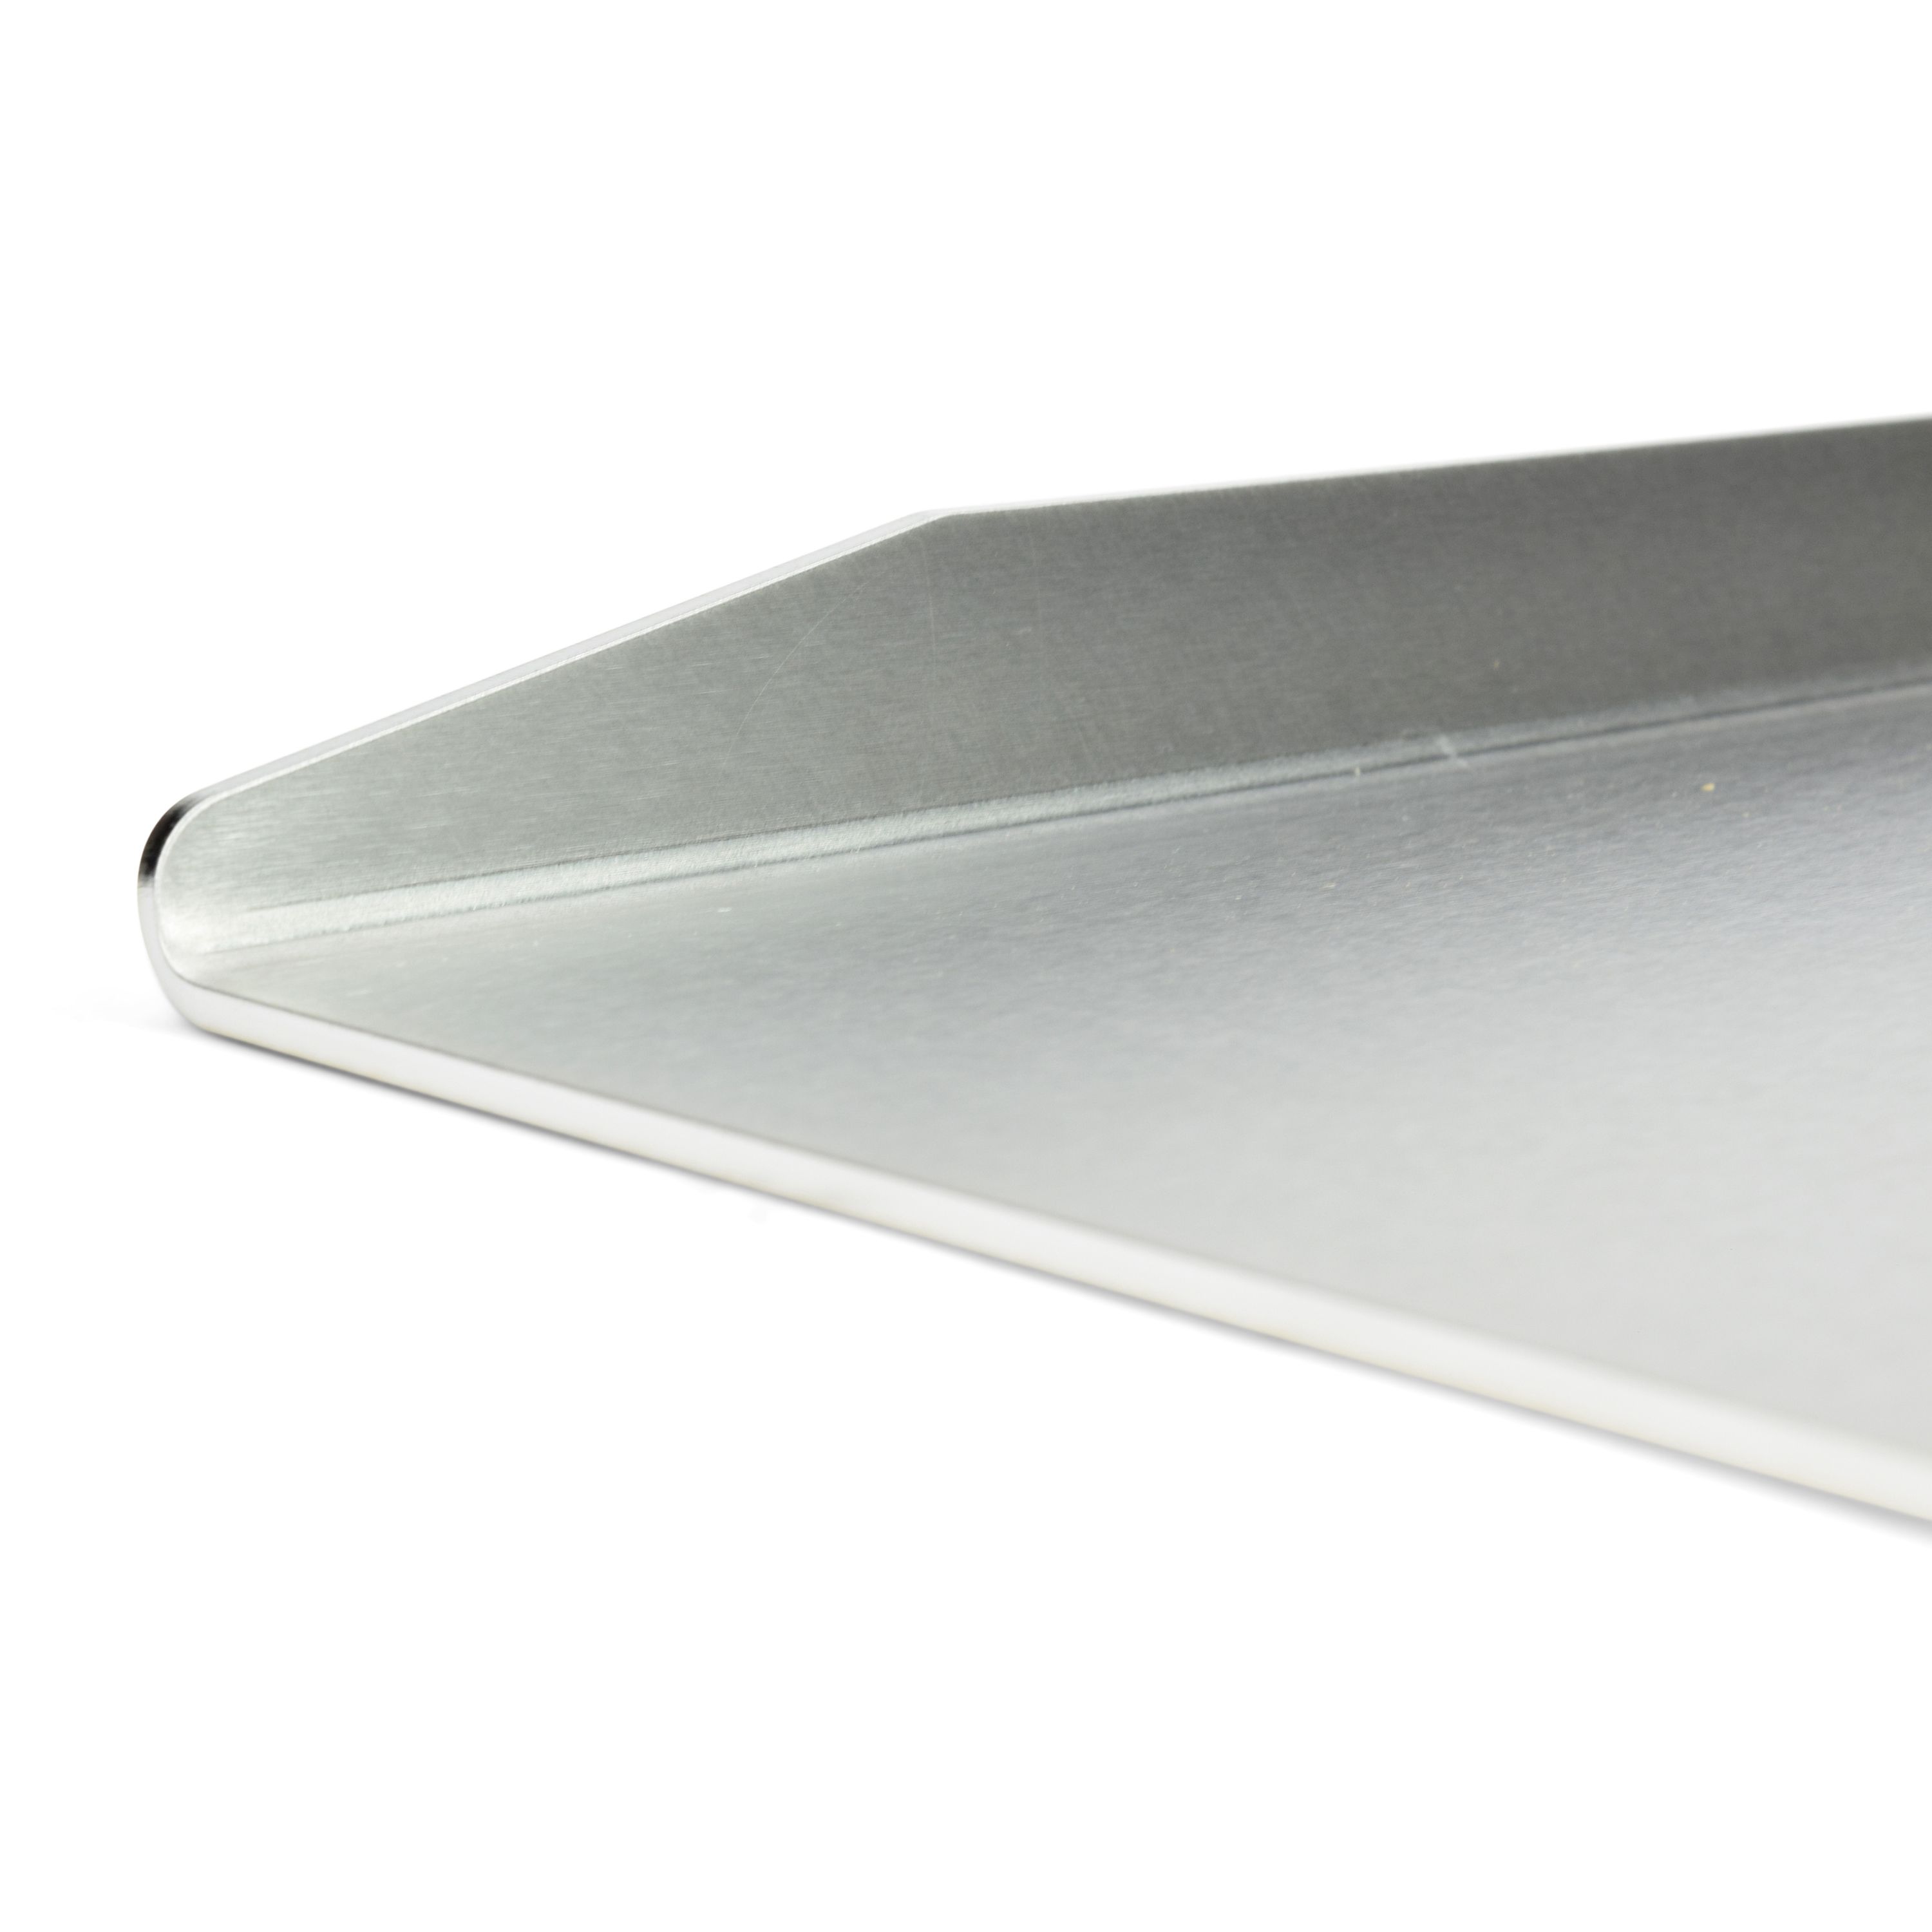 Stainless Steel Grill Plate - Plancha 45 x 34cm for Napoleon LEX LE 485 Prestige P500 and Rösle Videro G3 G4 G6